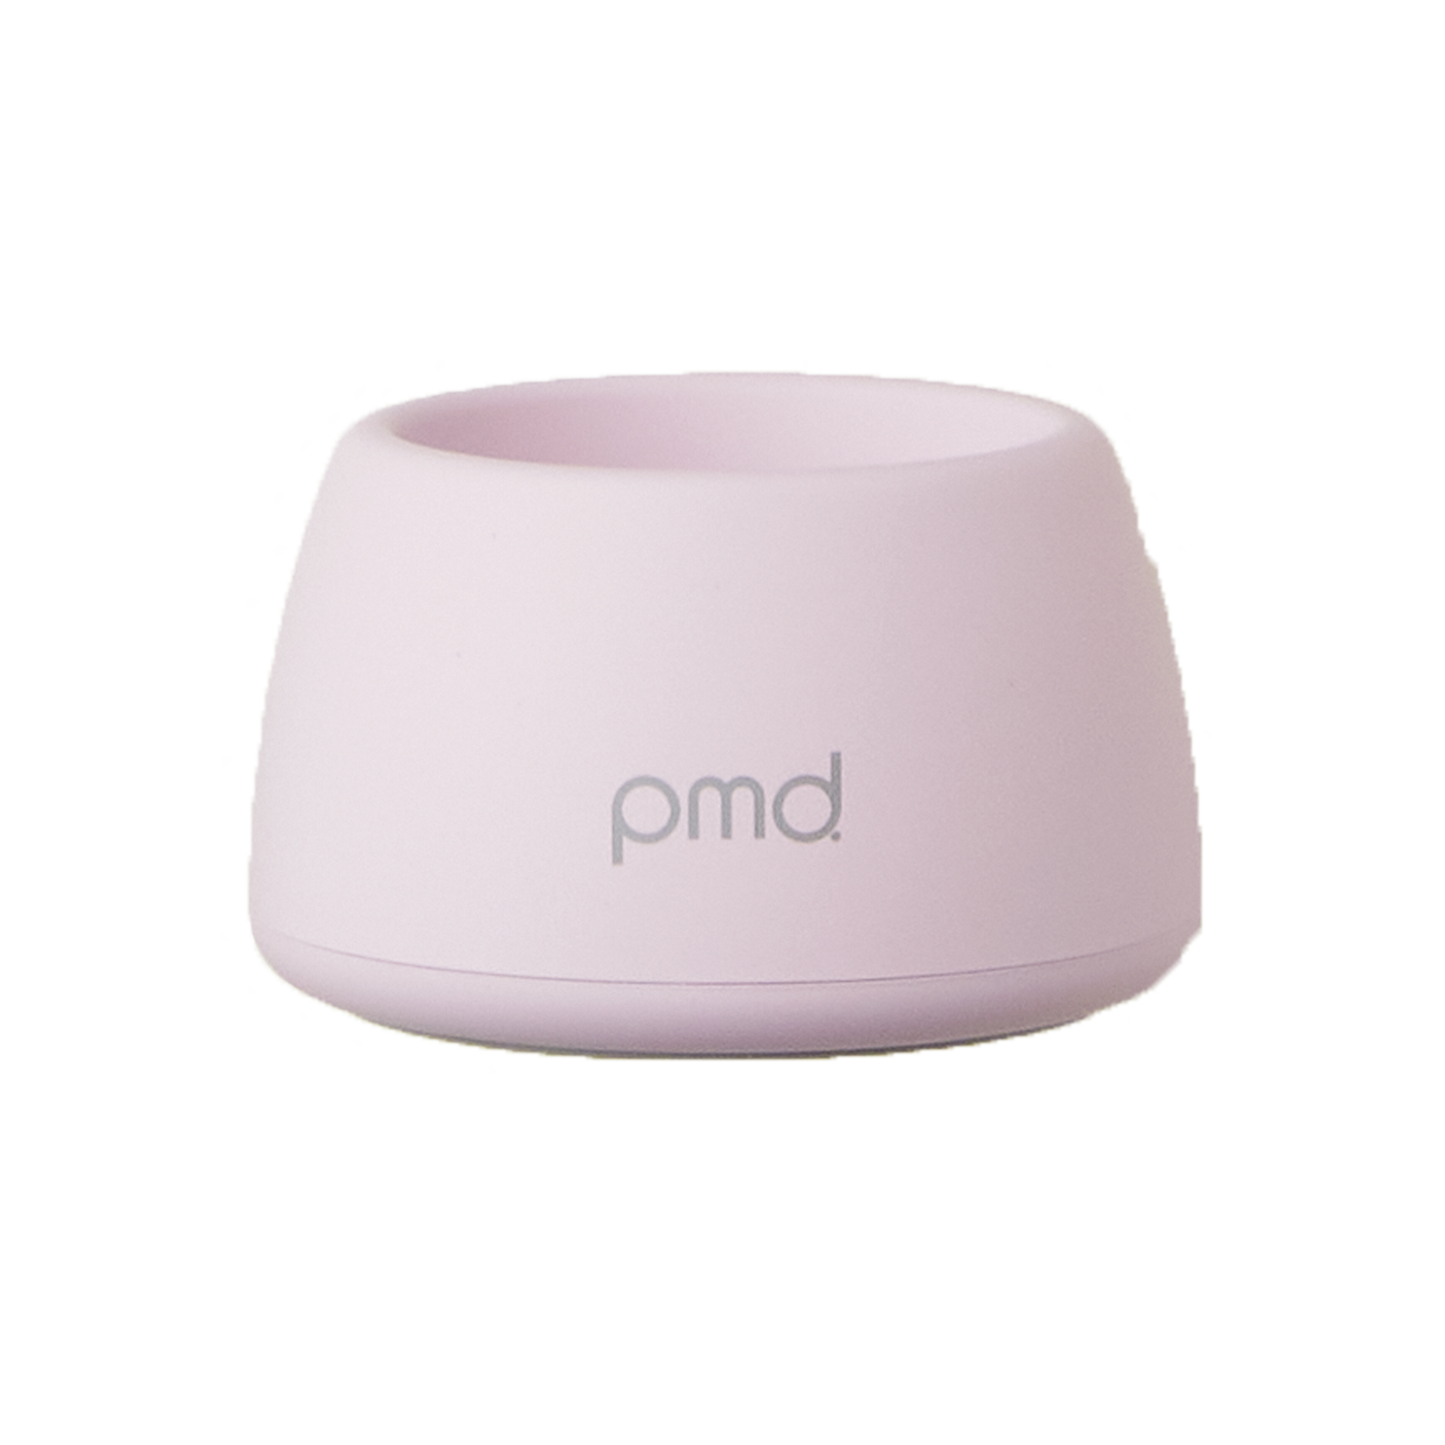 The Personal Microderm Elite Pro Charging Base